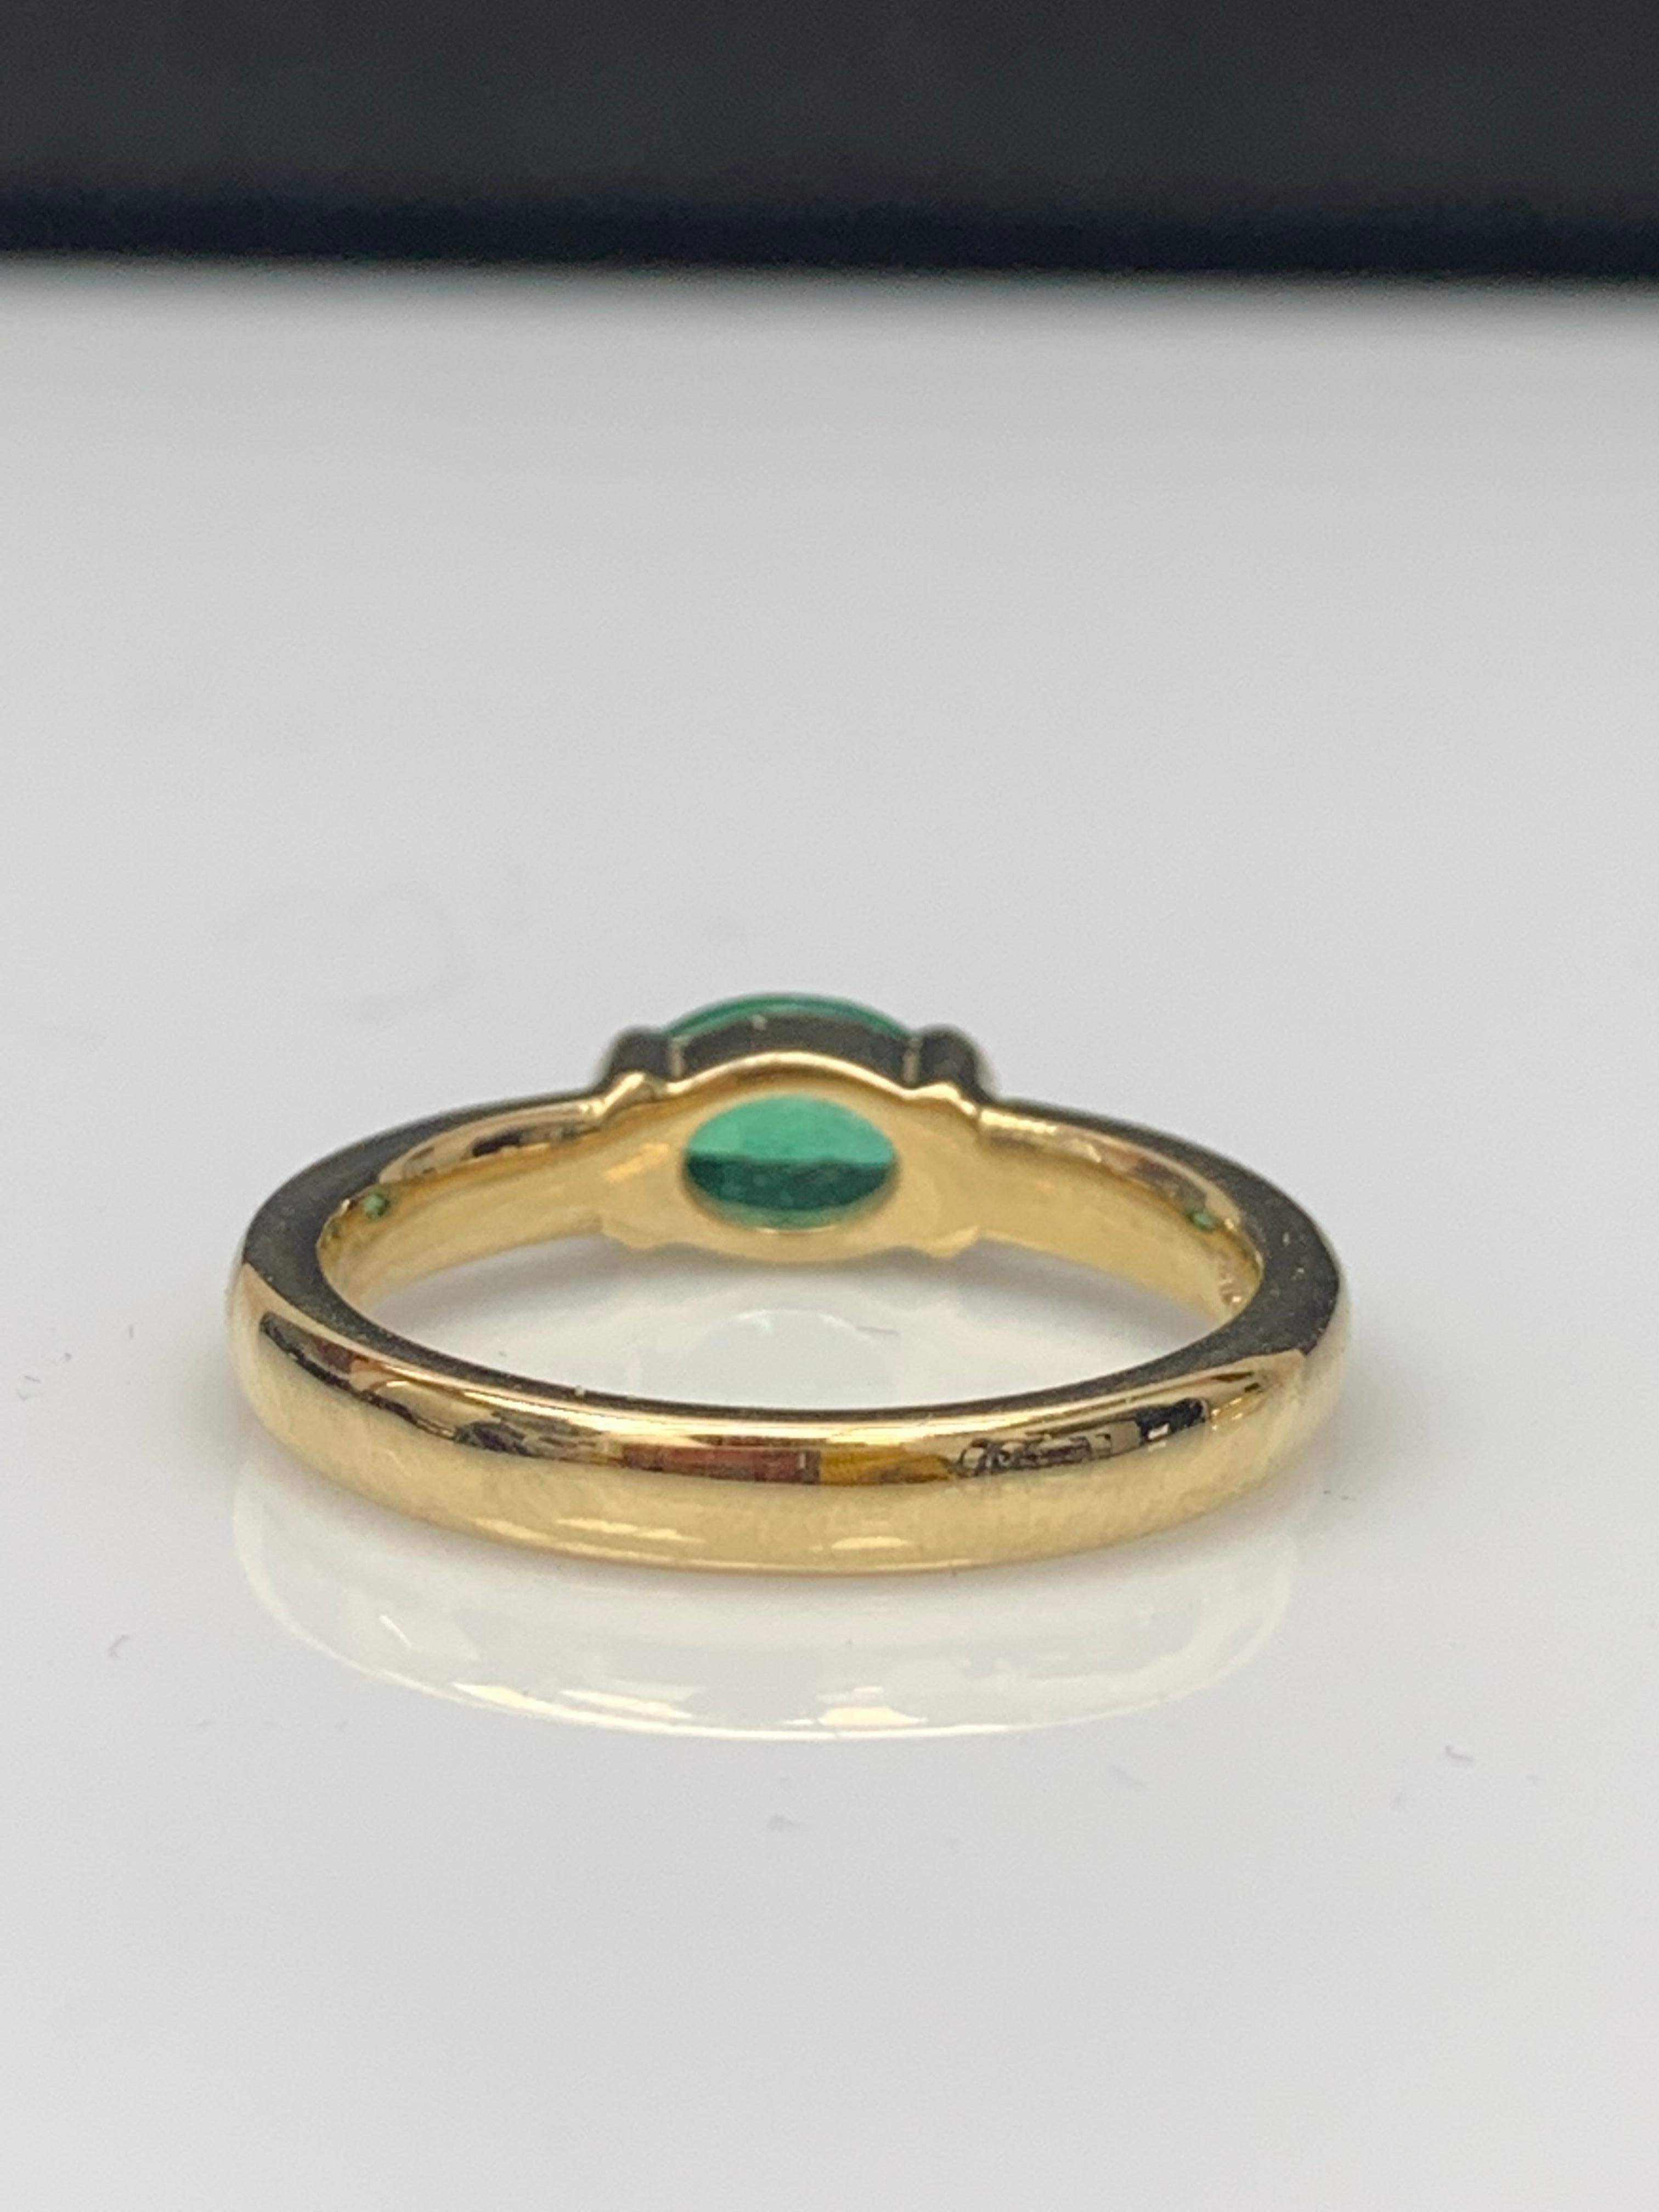 0.77 Carat Oval Cut Emerald Band Ring in 14K Yellow Gold For Sale 6